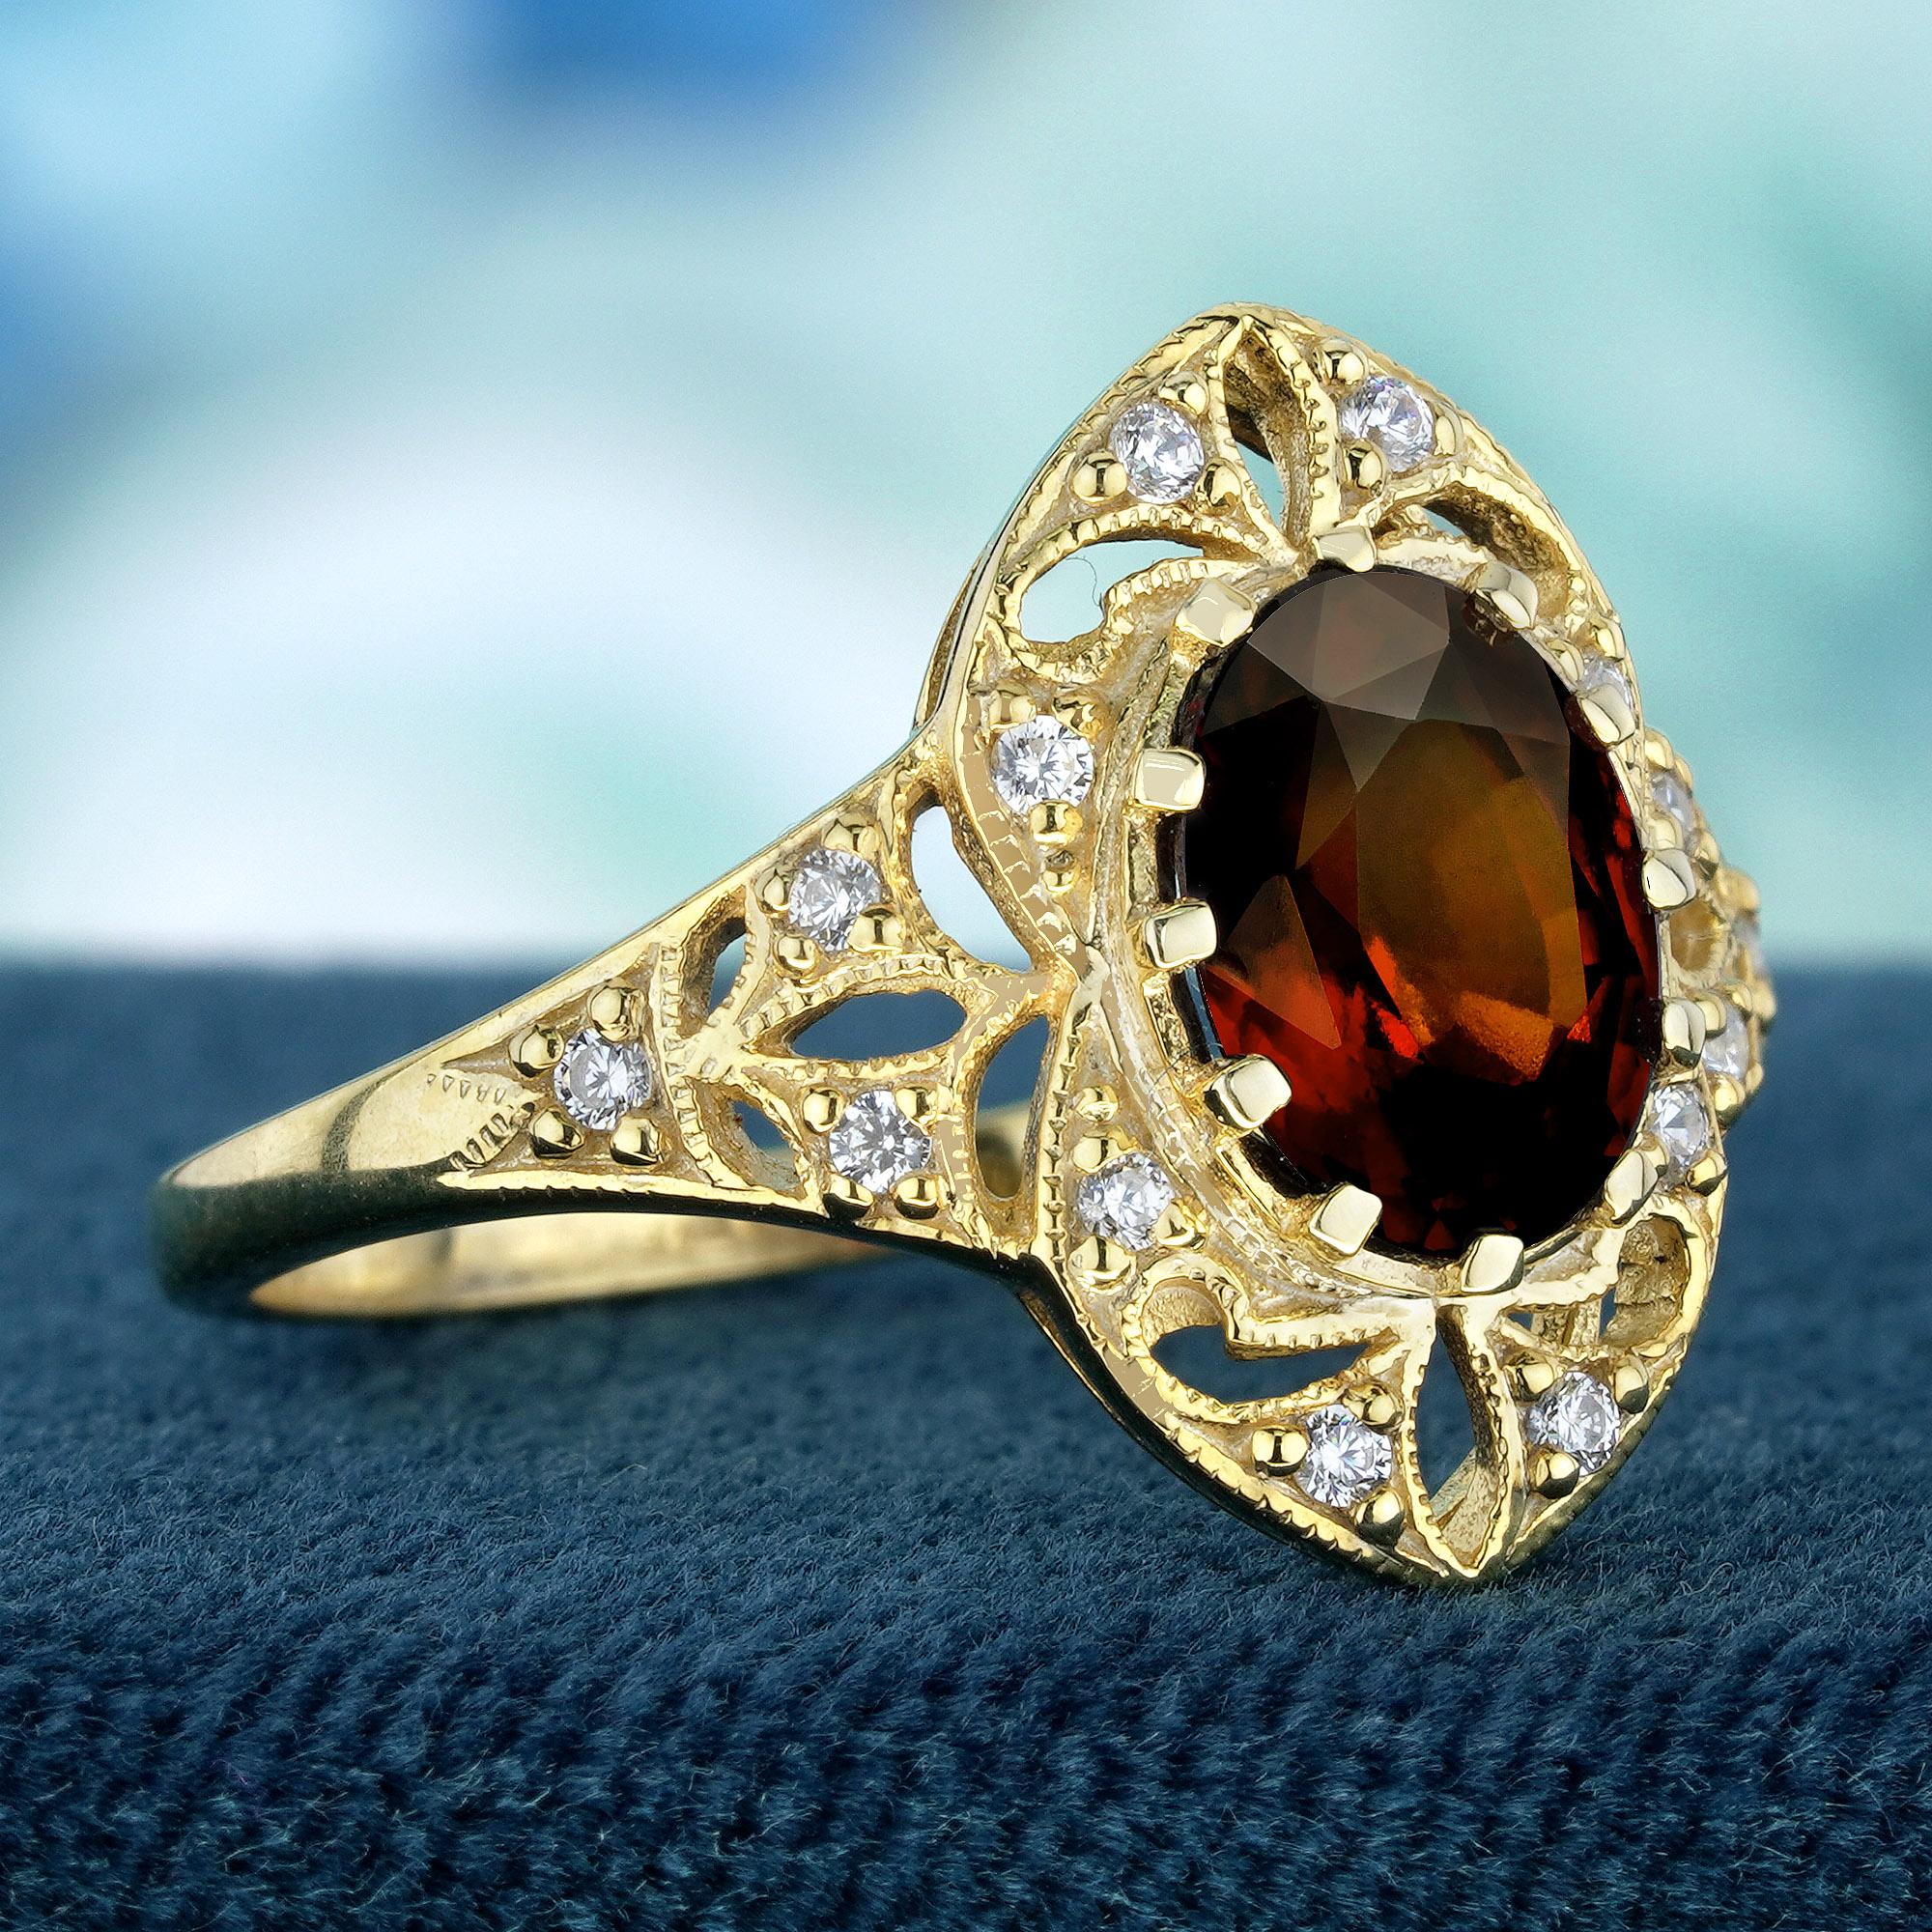 This vintage-inspired ring creates a stunning vintage ensemble. The primary oval-shaped, red natural garnet is the centerpiece, flanked by the sparkle of round natural diamonds Anchored in a charming yellow gold setting that exudes sophistication.